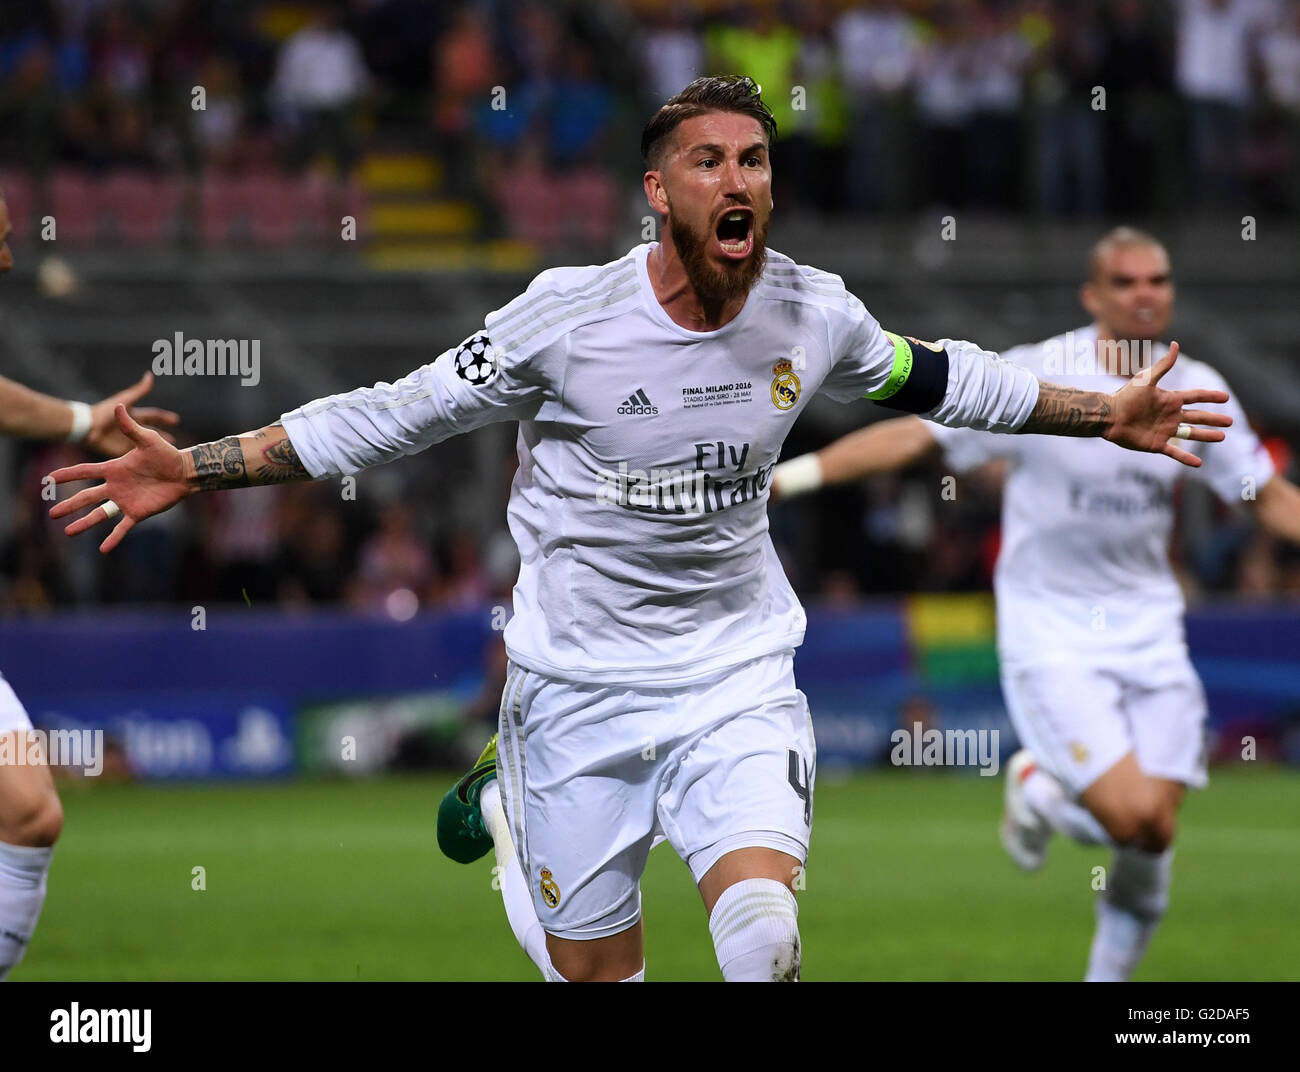 Milan, Italy. 28th May, 2016. Sergio Ramos of Real Madrid celebrates after scoring during the UEFA Champions League Final match between Real Madrid and Atletico Madrid in Milan, Italy, May 28, 2016. Real Madrid won over Atletico Madrid 5-3 on penalties after a 1-1 draw and thus claimed the title. Credit:  Alberto Lingria/Xinhua/Alamy Live News Stock Photo